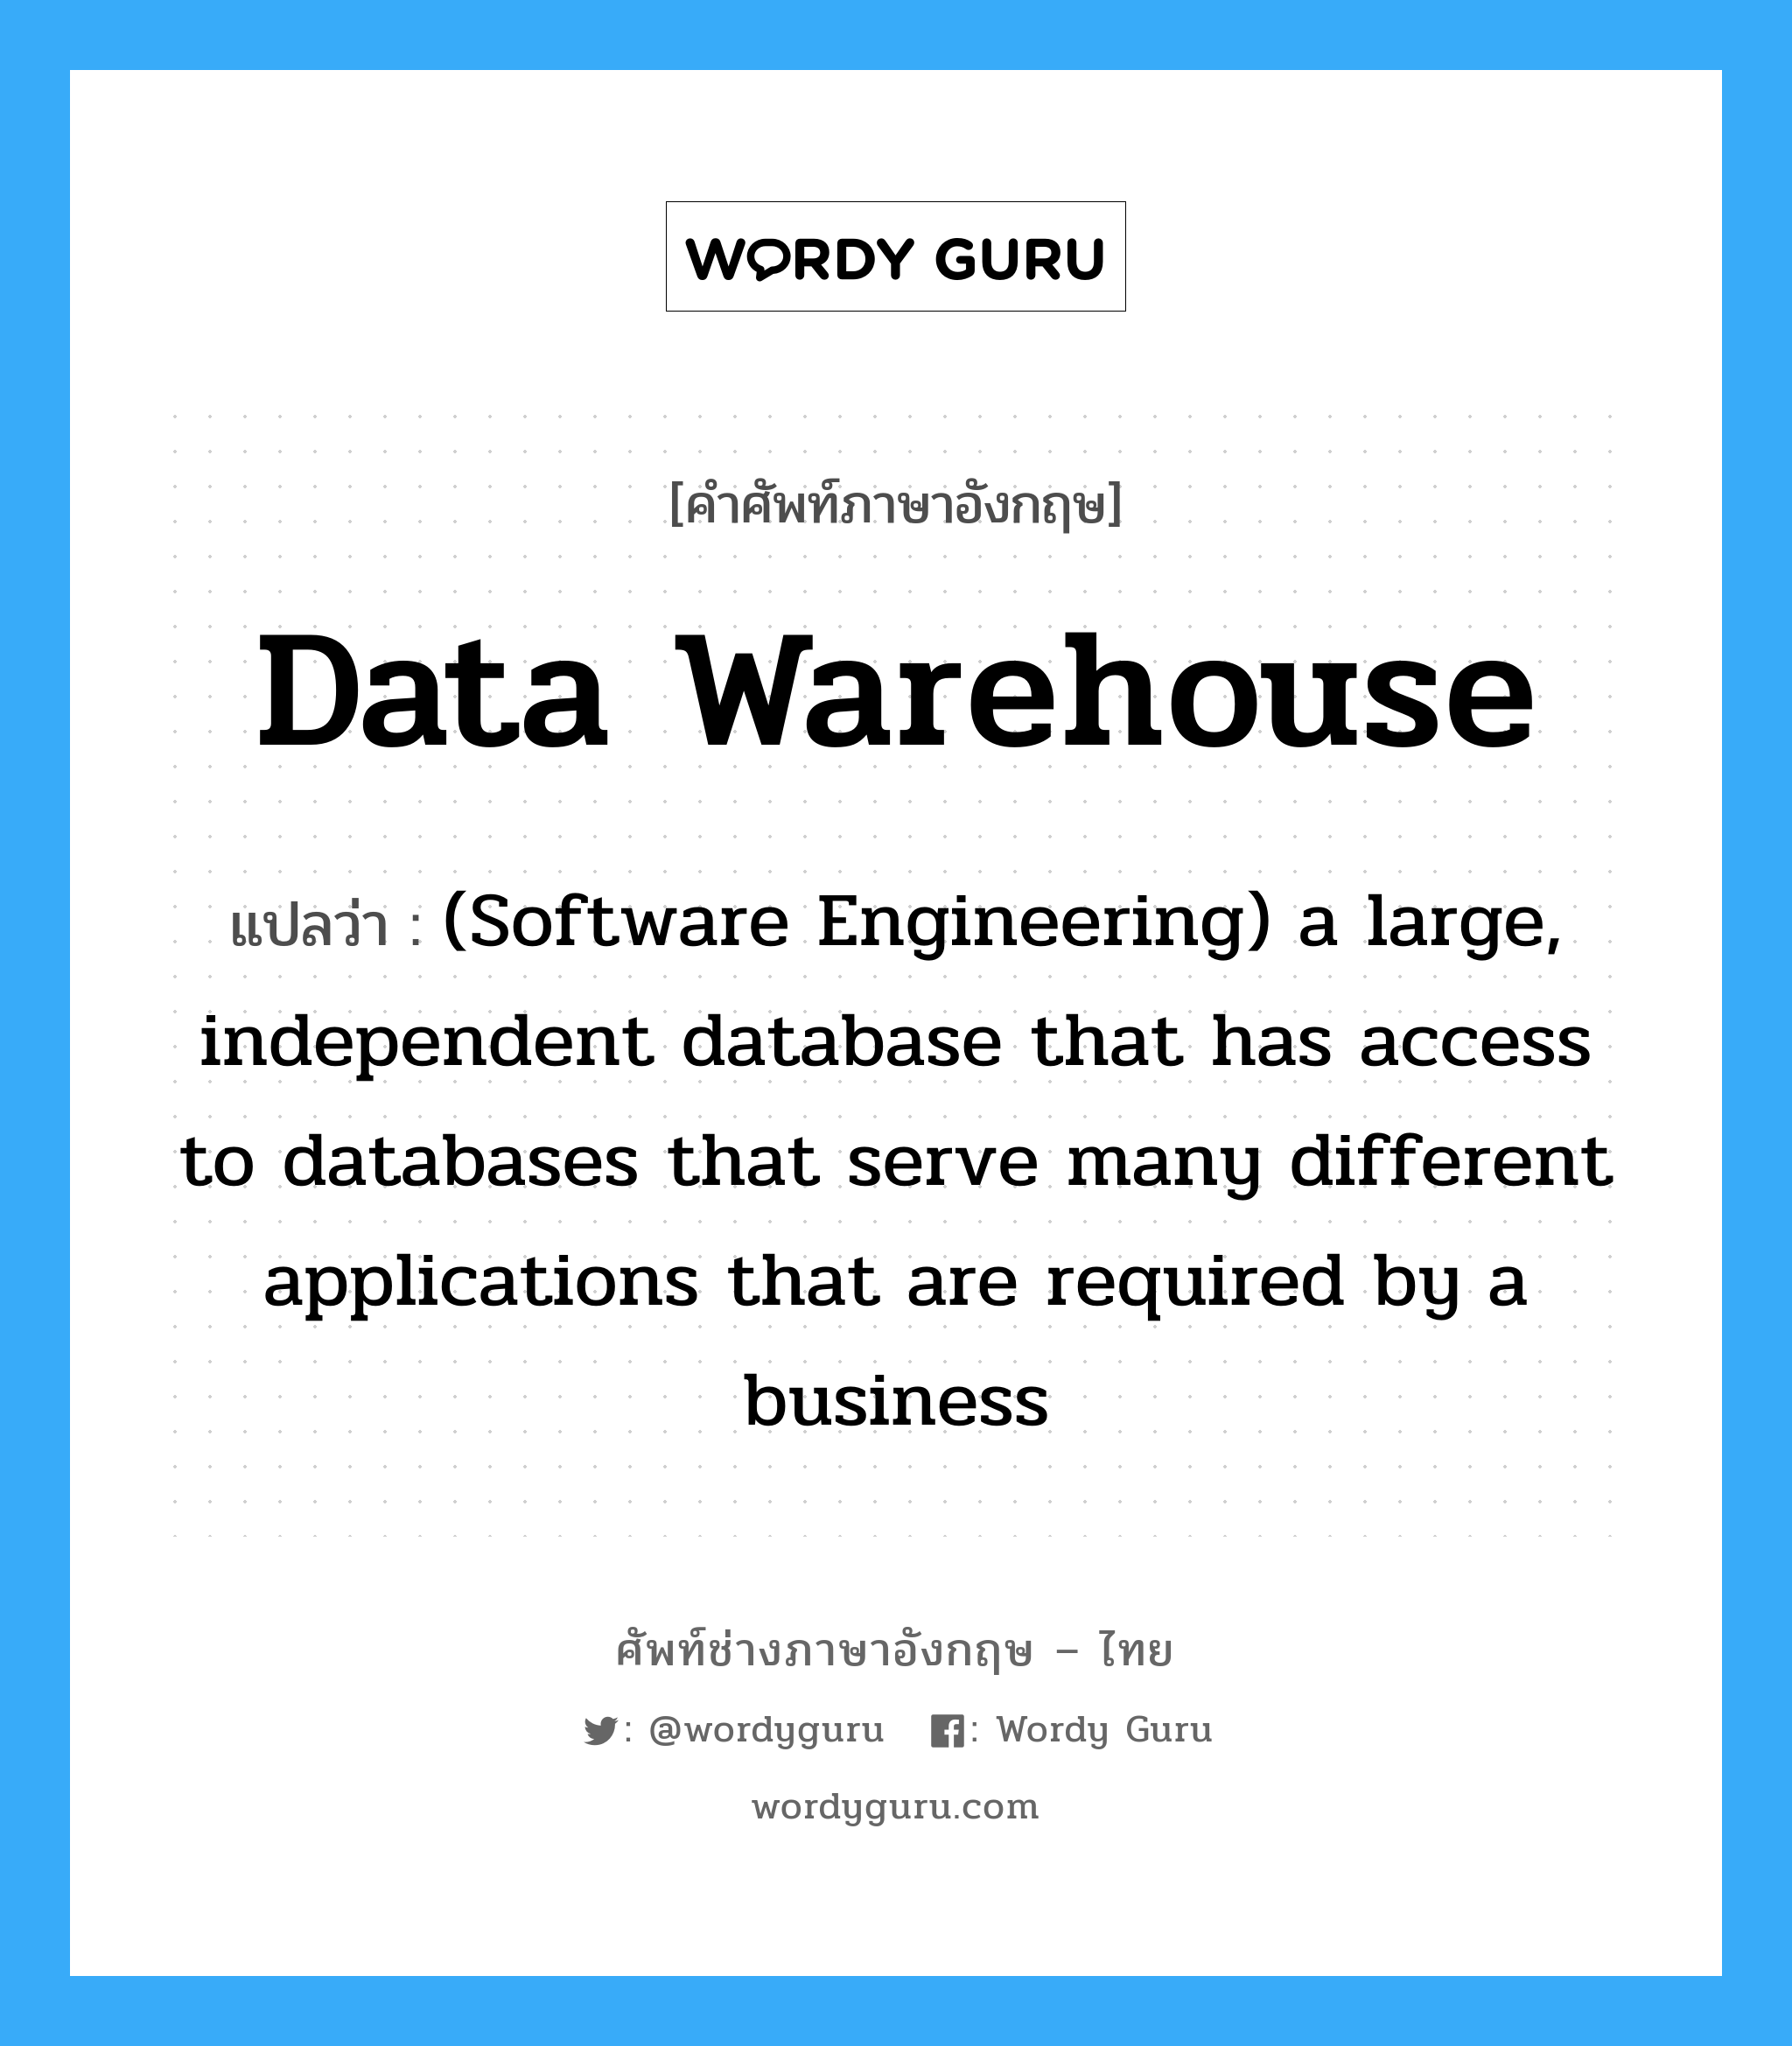 (Software Engineering) a large, independent database that has access to databases that serve many different applications that are required by a business ภาษาอังกฤษ?, คำศัพท์ช่างภาษาอังกฤษ - ไทย (Software Engineering) a large, independent database that has access to databases that serve many different applications that are required by a business คำศัพท์ภาษาอังกฤษ (Software Engineering) a large, independent database that has access to databases that serve many different applications that are required by a business แปลว่า Data warehouse